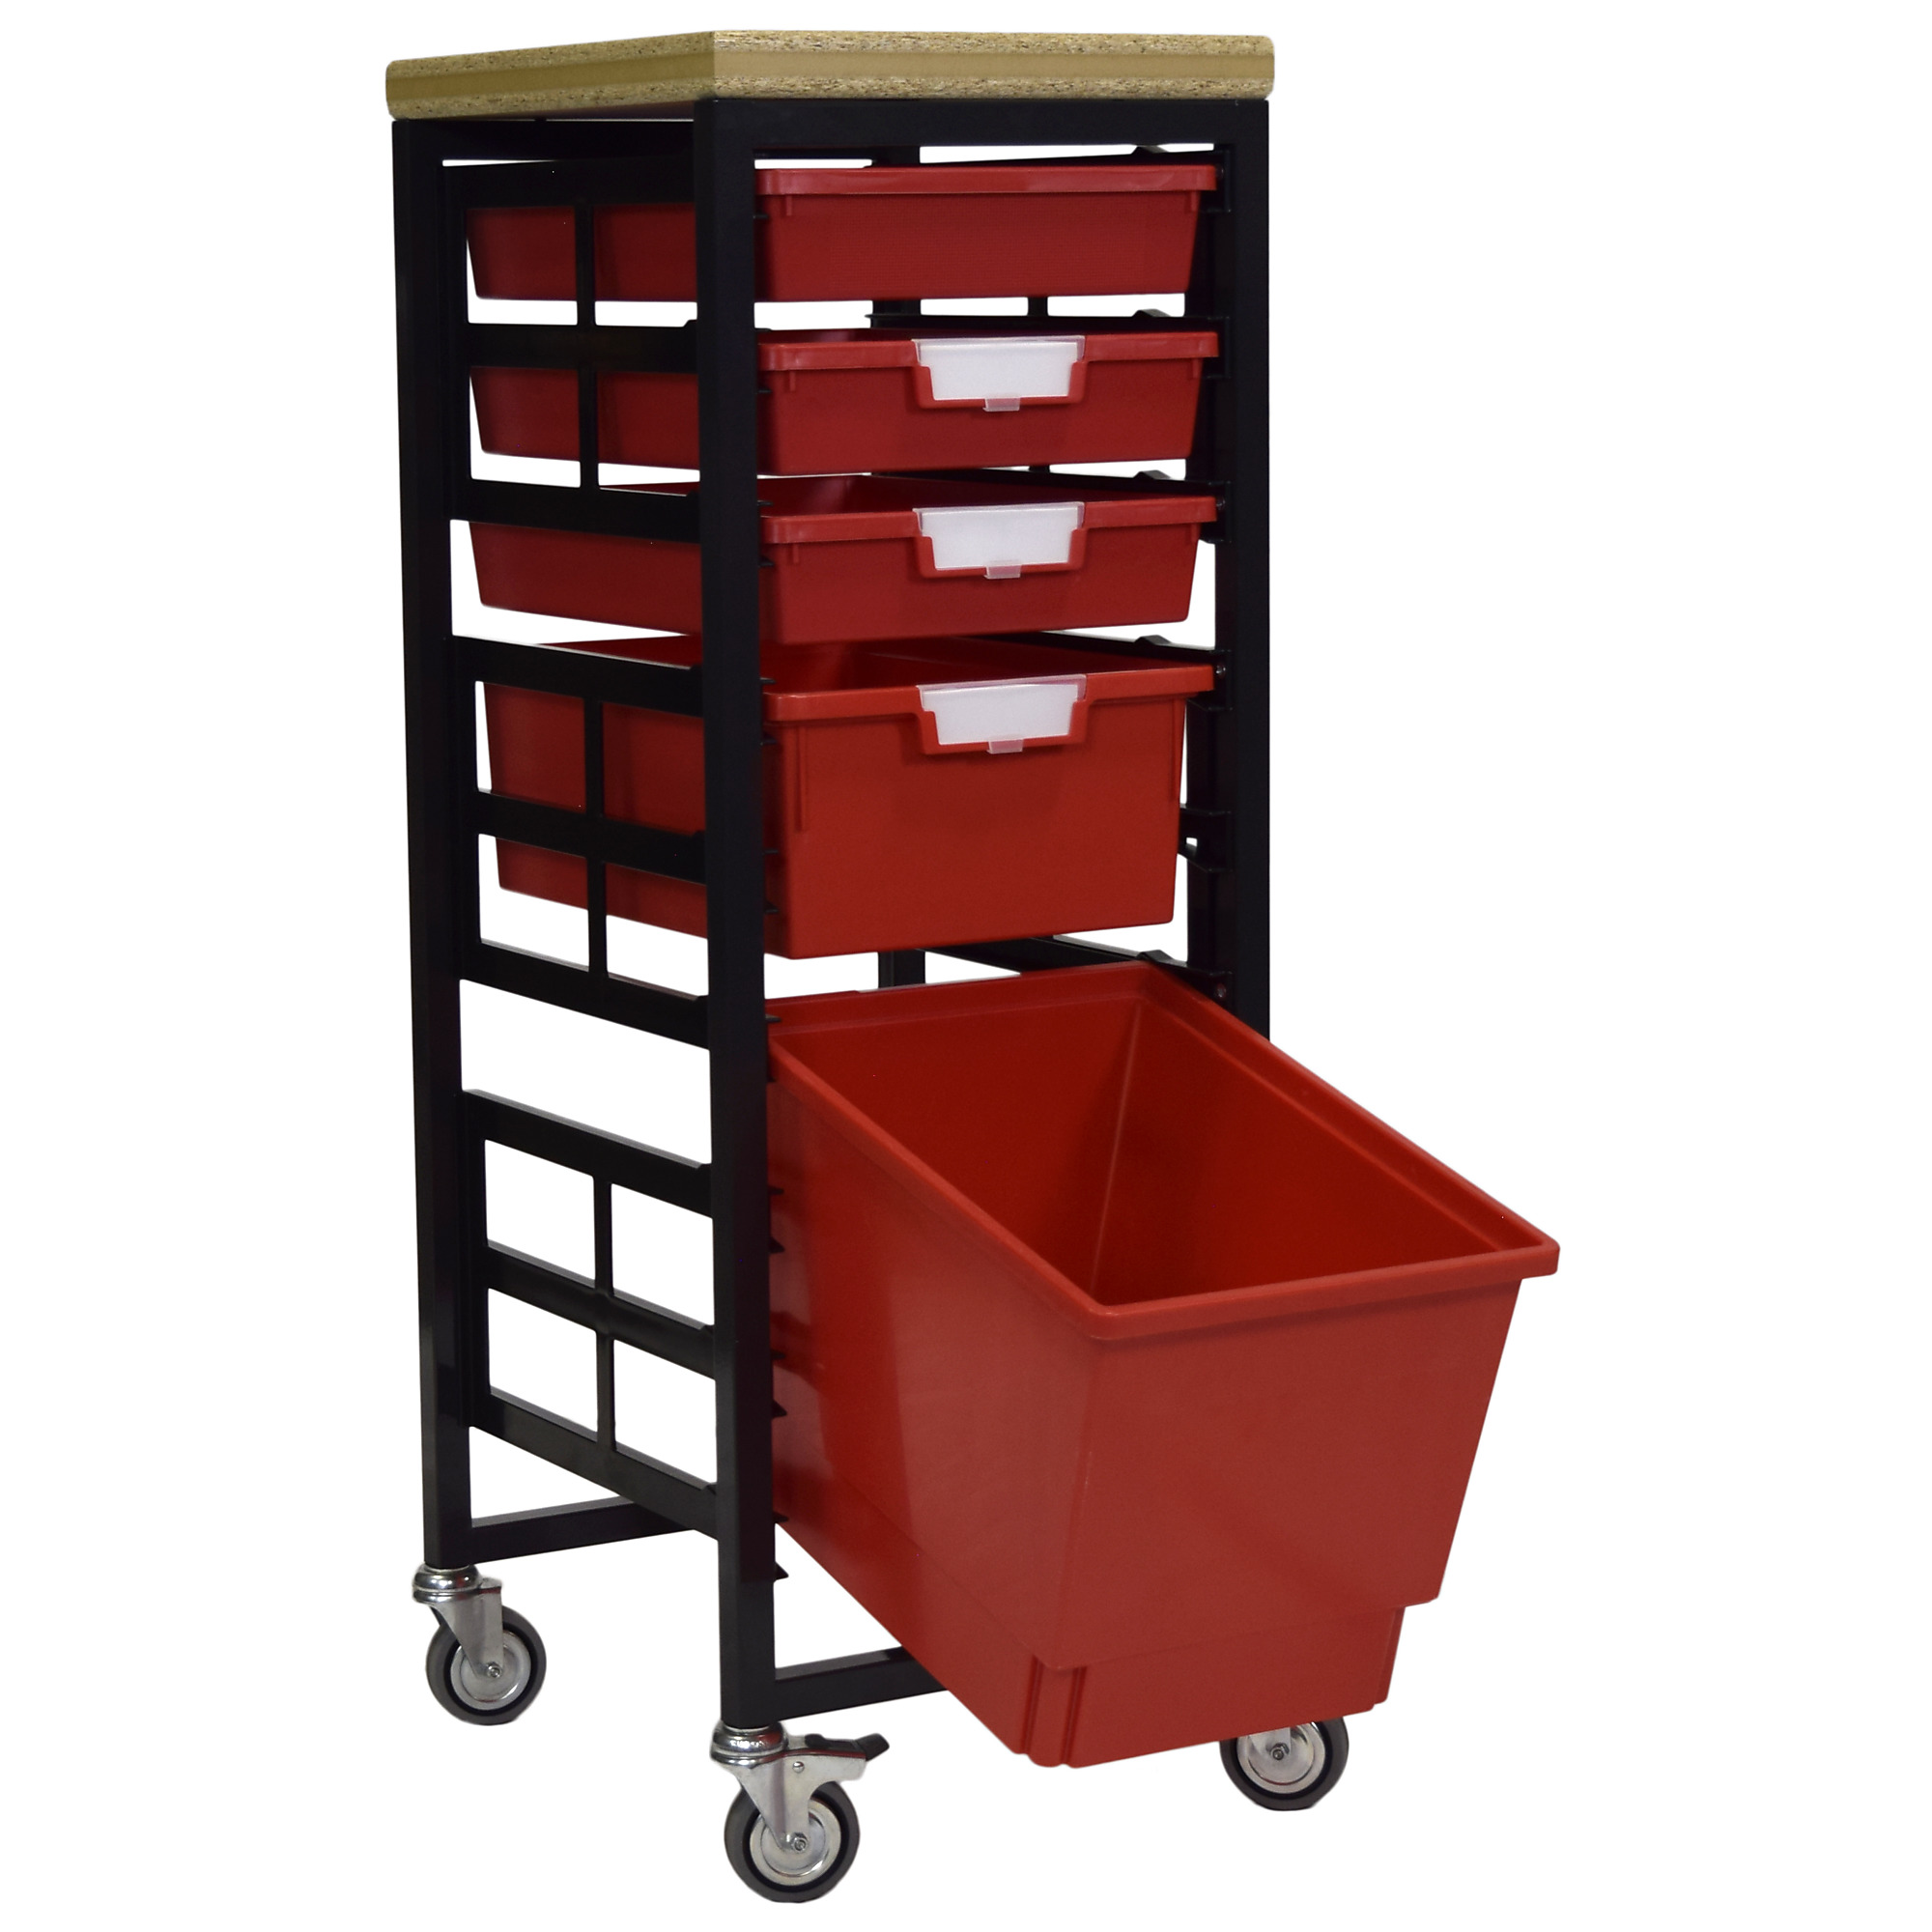 Certwood StorWerks, Mobile Work Station w/Wood Top -5 Trays-Red, Included (qty.) 5, Material Plastic, Height 3 in, Model CE2097DGGC-3S1D1QPR